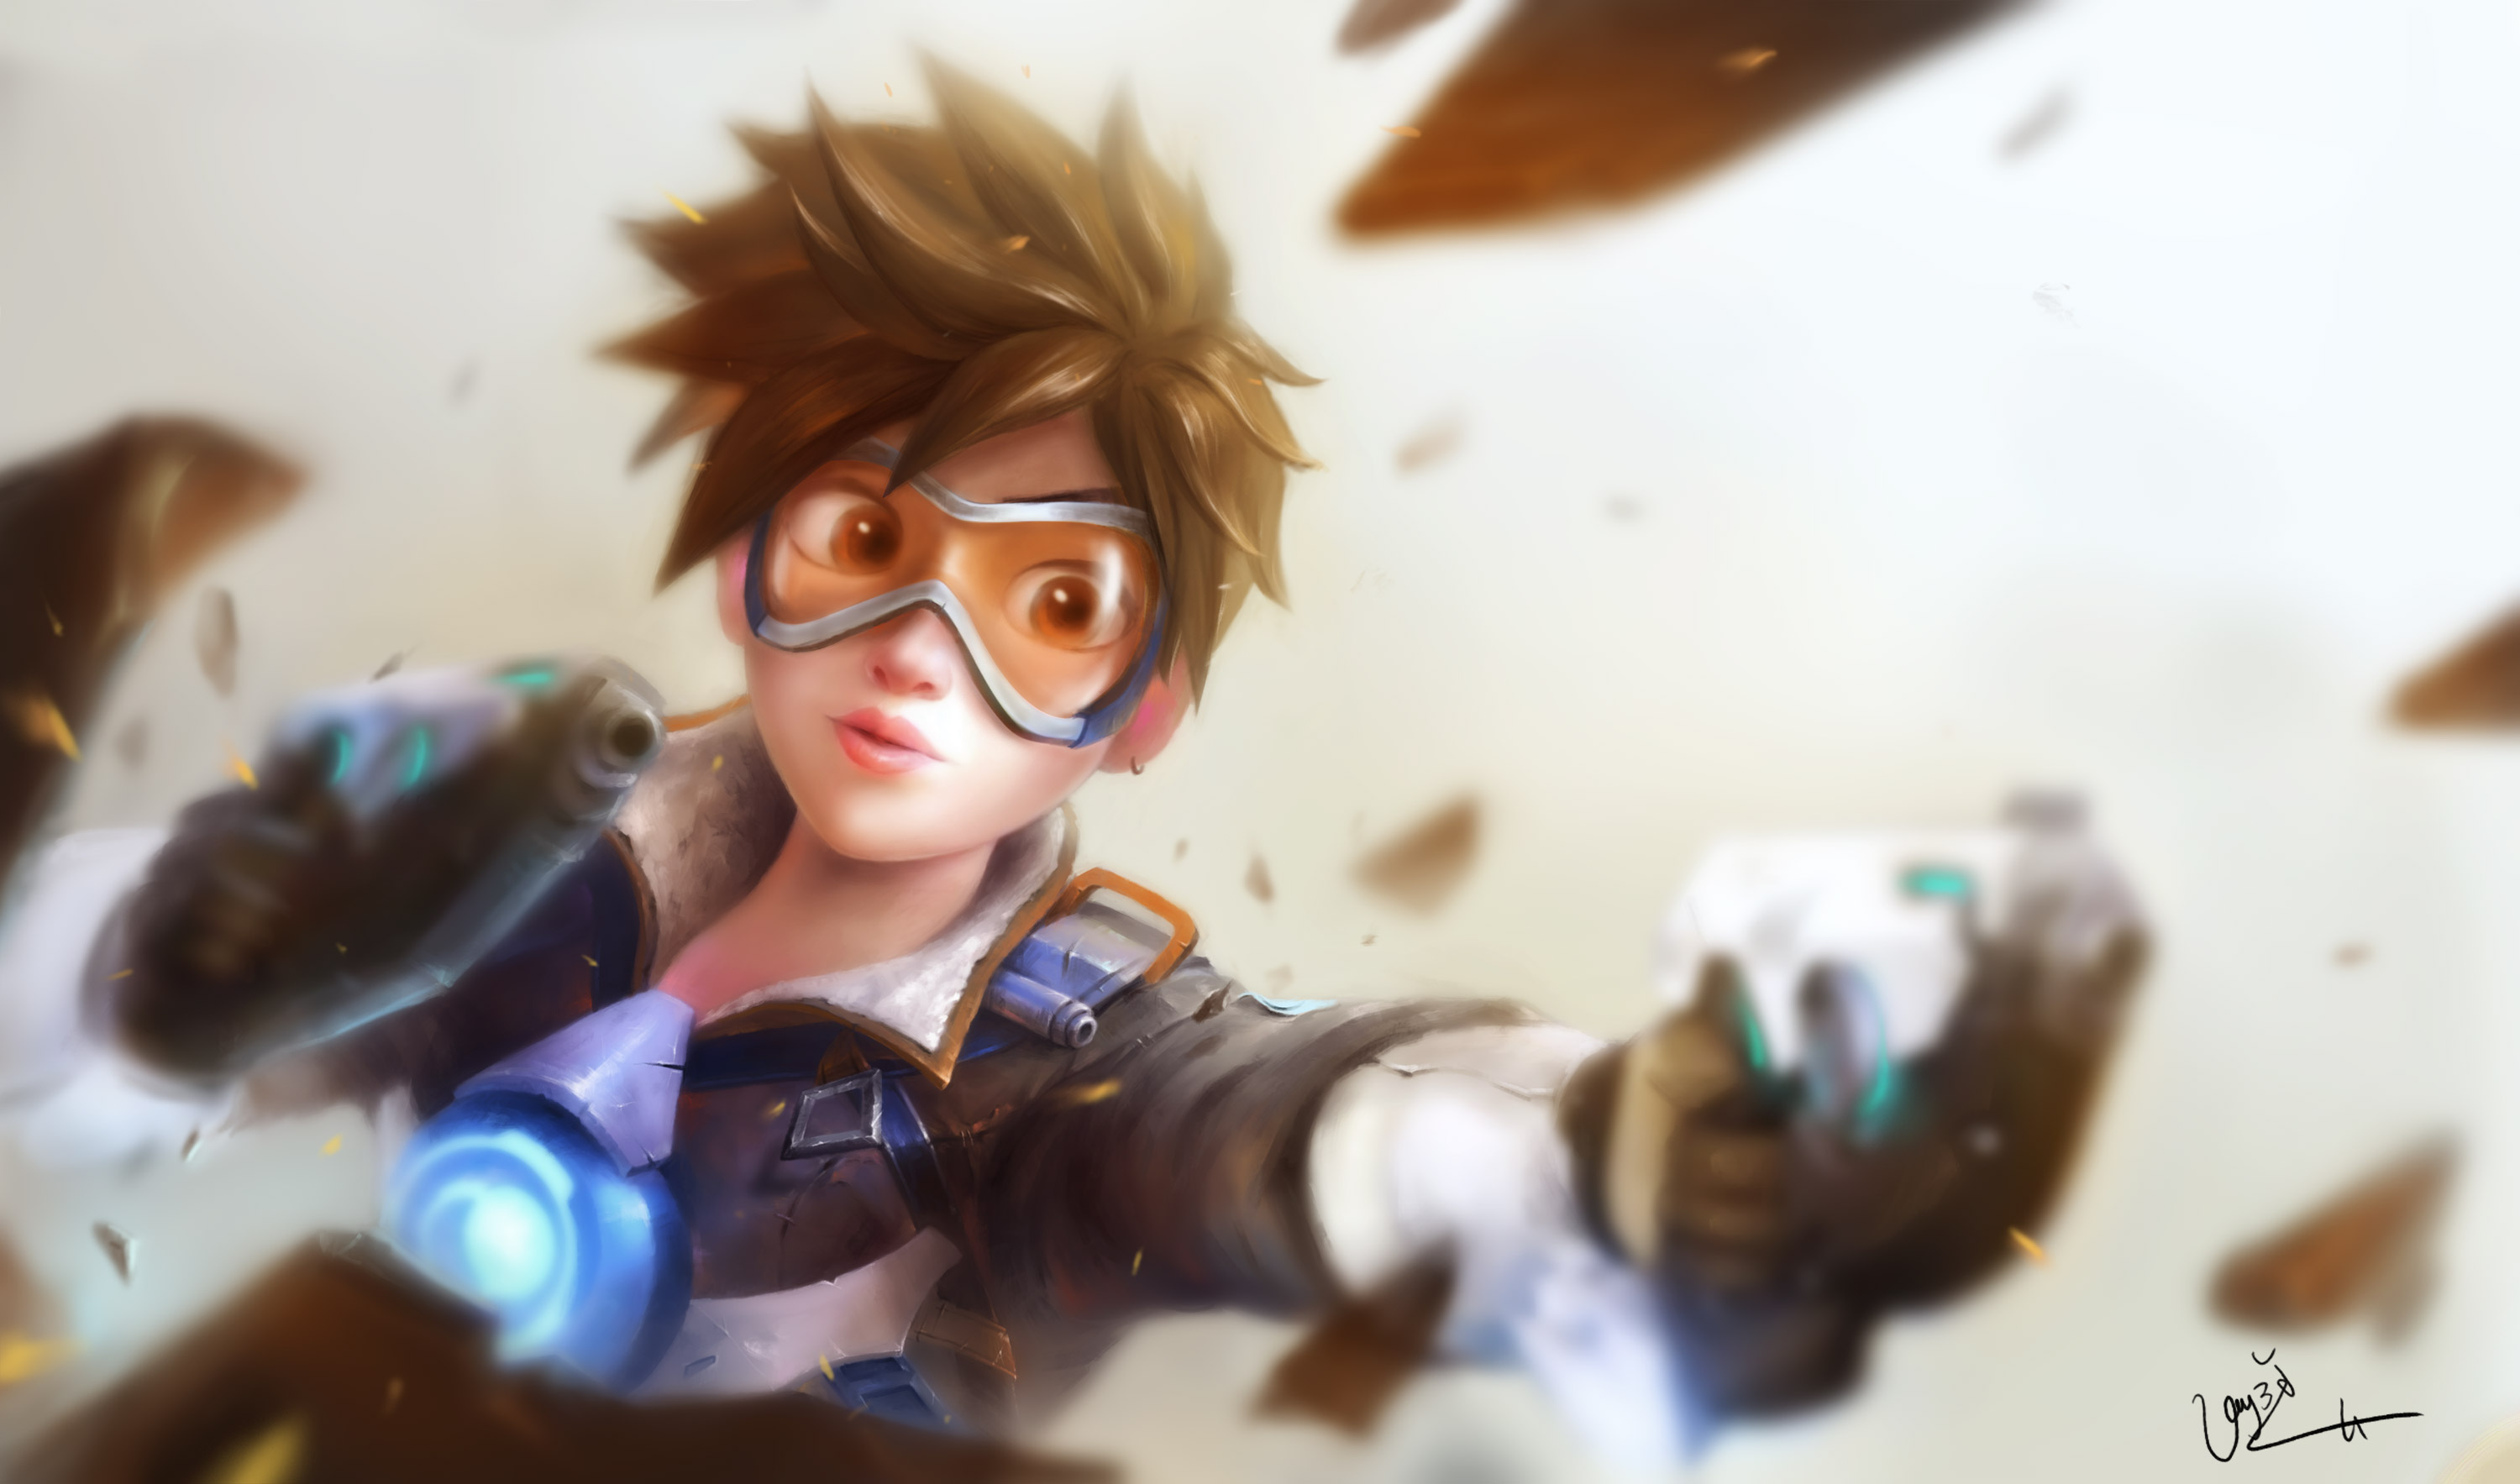 Wallpapers tracer glasses games on the desktop